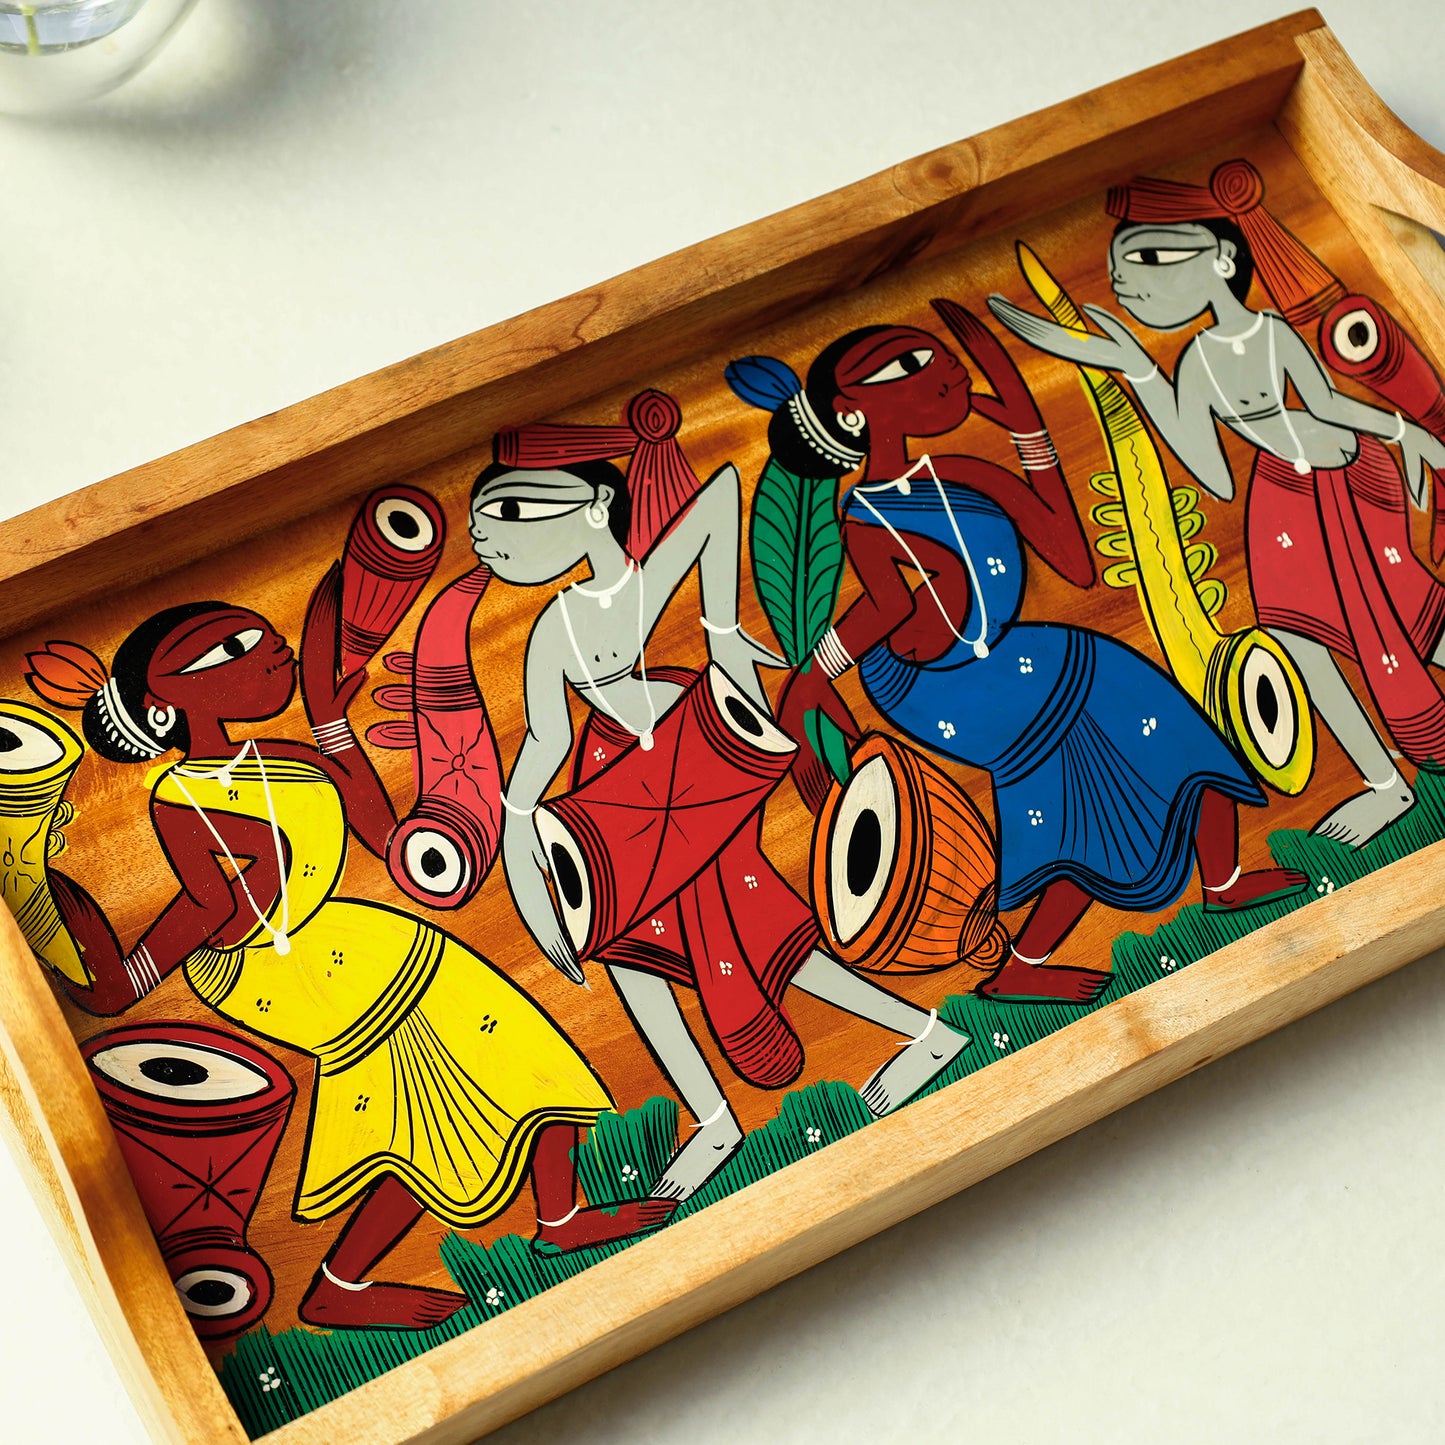 Traditional Pattachitra Hand Painted Akashmoni Wooden Tray (8 x 15 in)